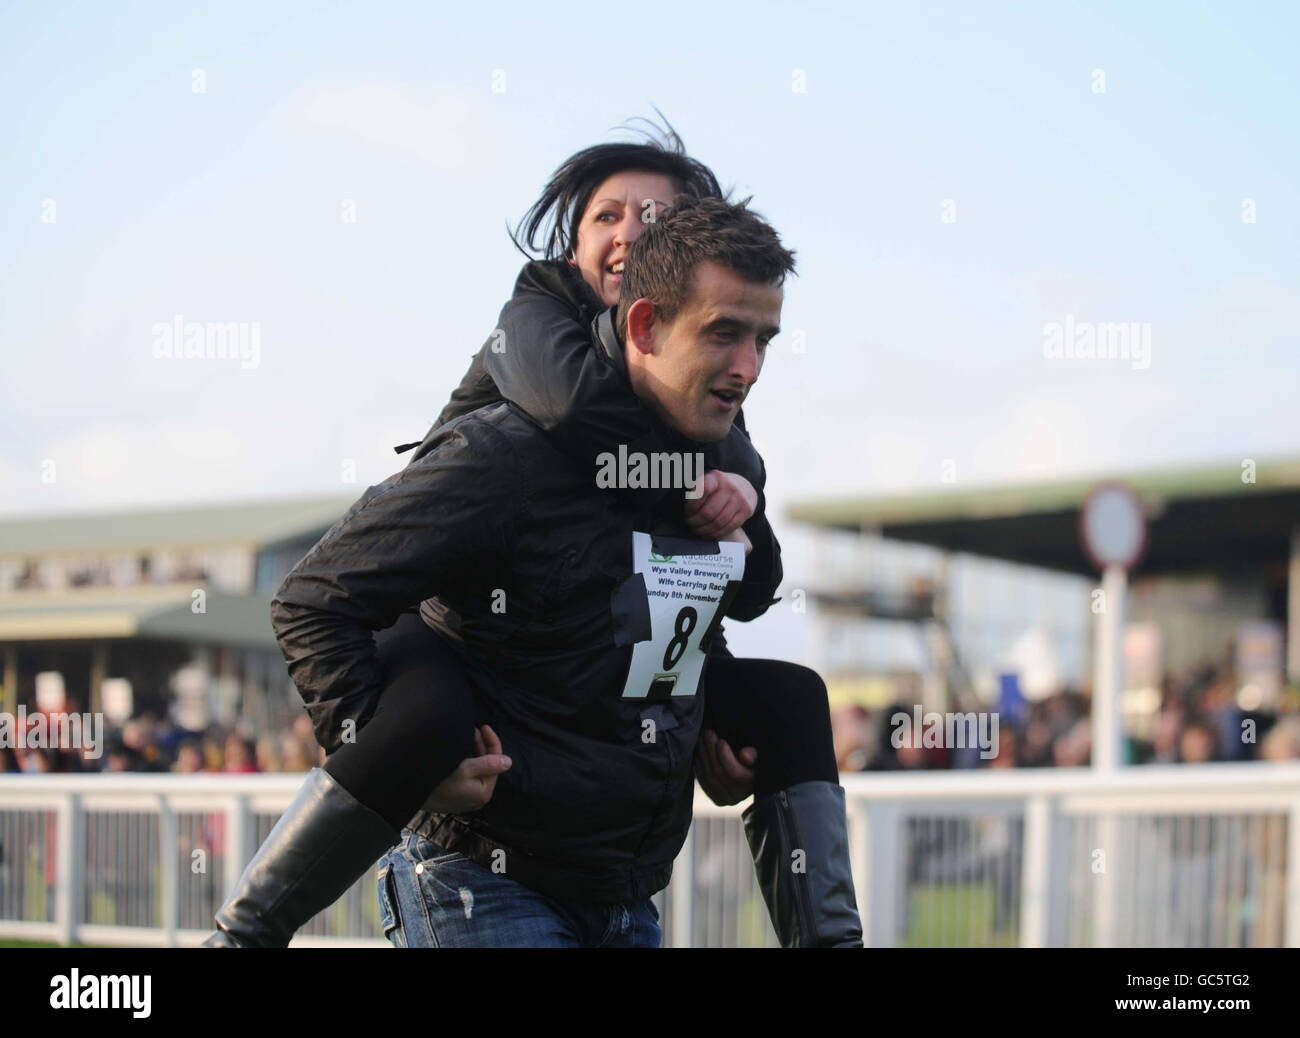 The winning couple of the wife carrying race Oliver Milligan and girlfriend Christina Davies both from Ebbw Vale at Hereford Racecourse crossing the finishing line. The race was sponsored by Wye Valley Brewery and the prize is their combined body weight in beer. Stock Photo